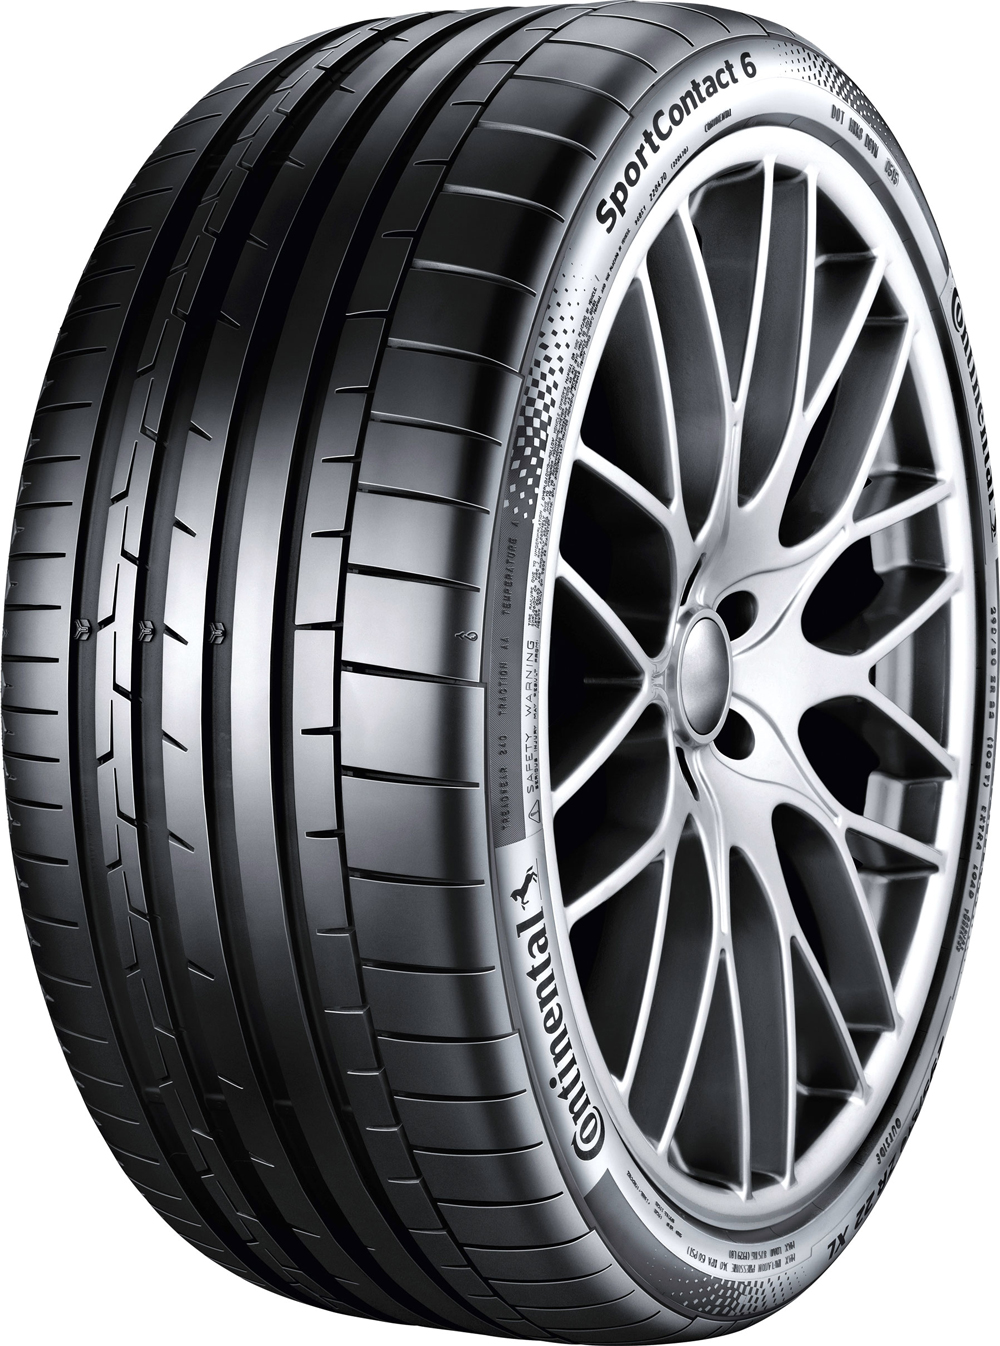 Автомобилни гуми CONTINENTAL SportContact 6 AO1 ContiSilent XL 255/35 R21 98Y